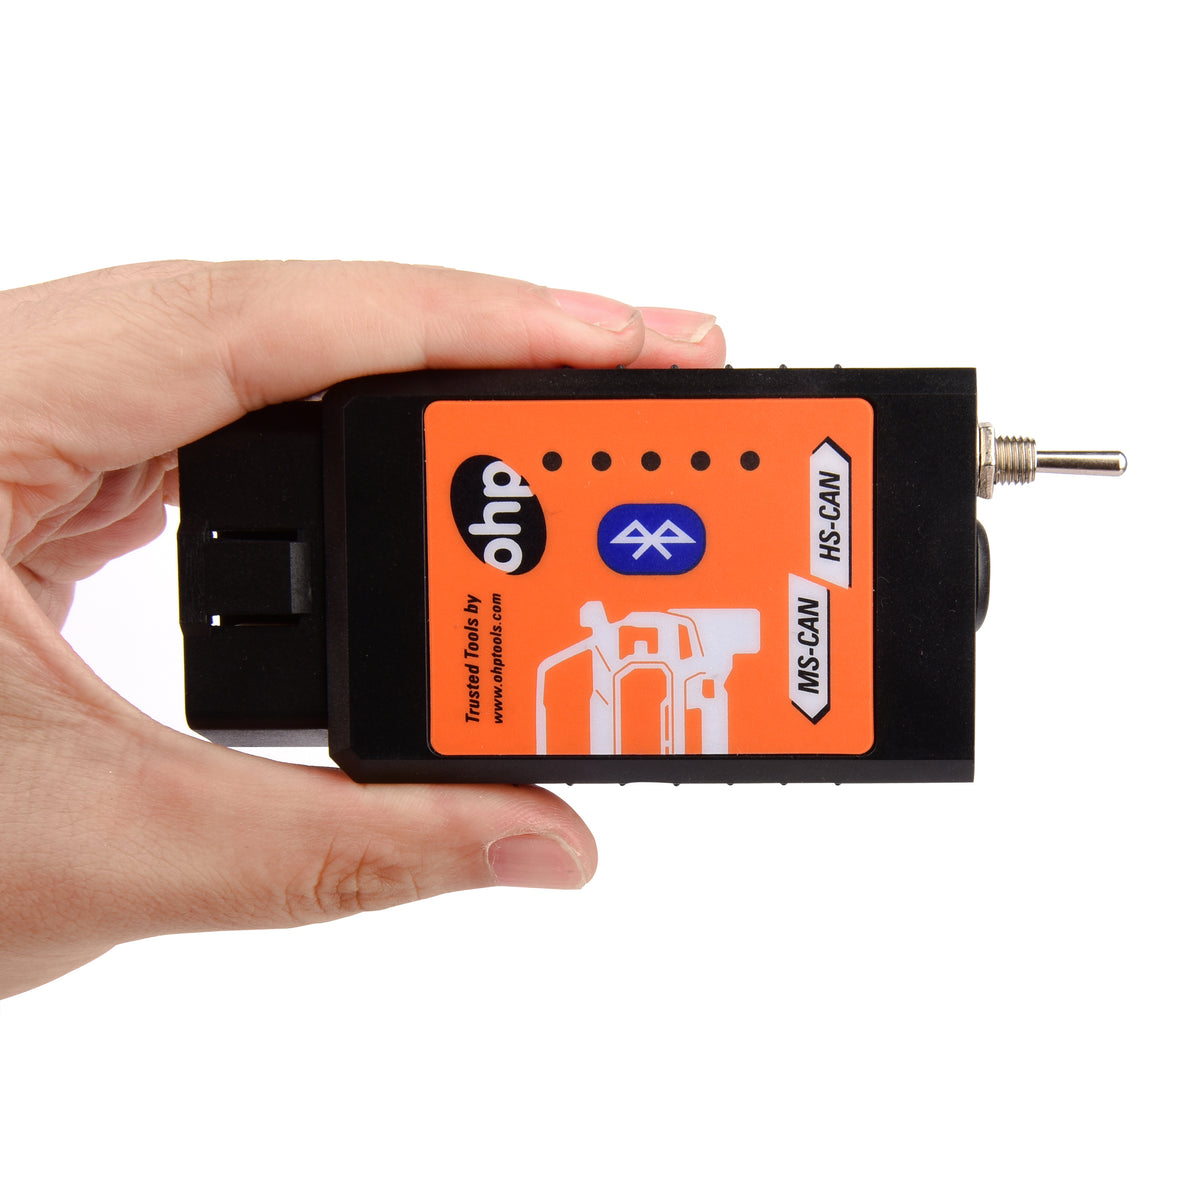 A Product Review of the OHP ELM327 FORScan OBD2 WiFi Adapter